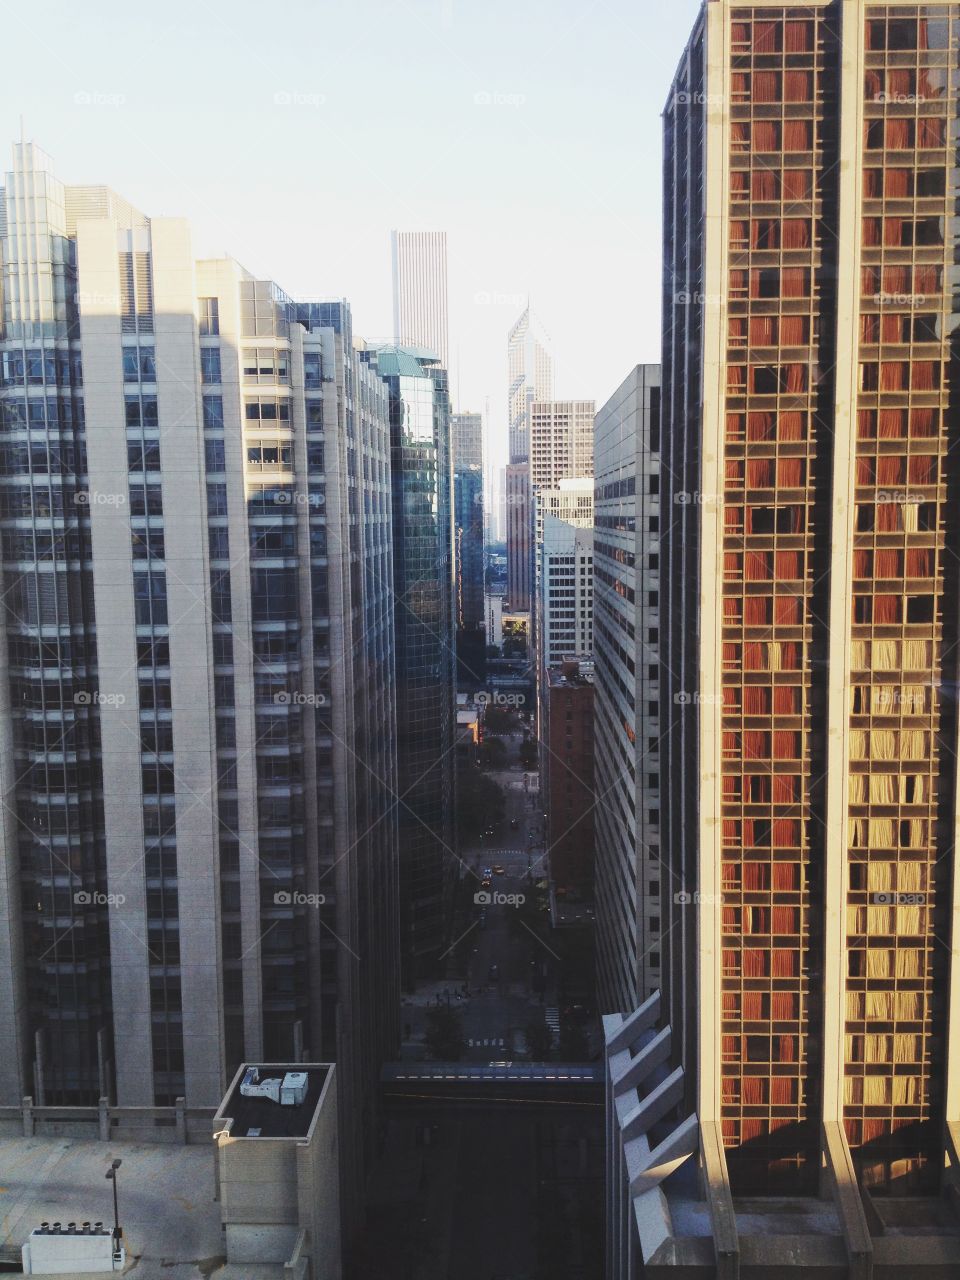 Architecture of Chicago. Taken in a high-rise  